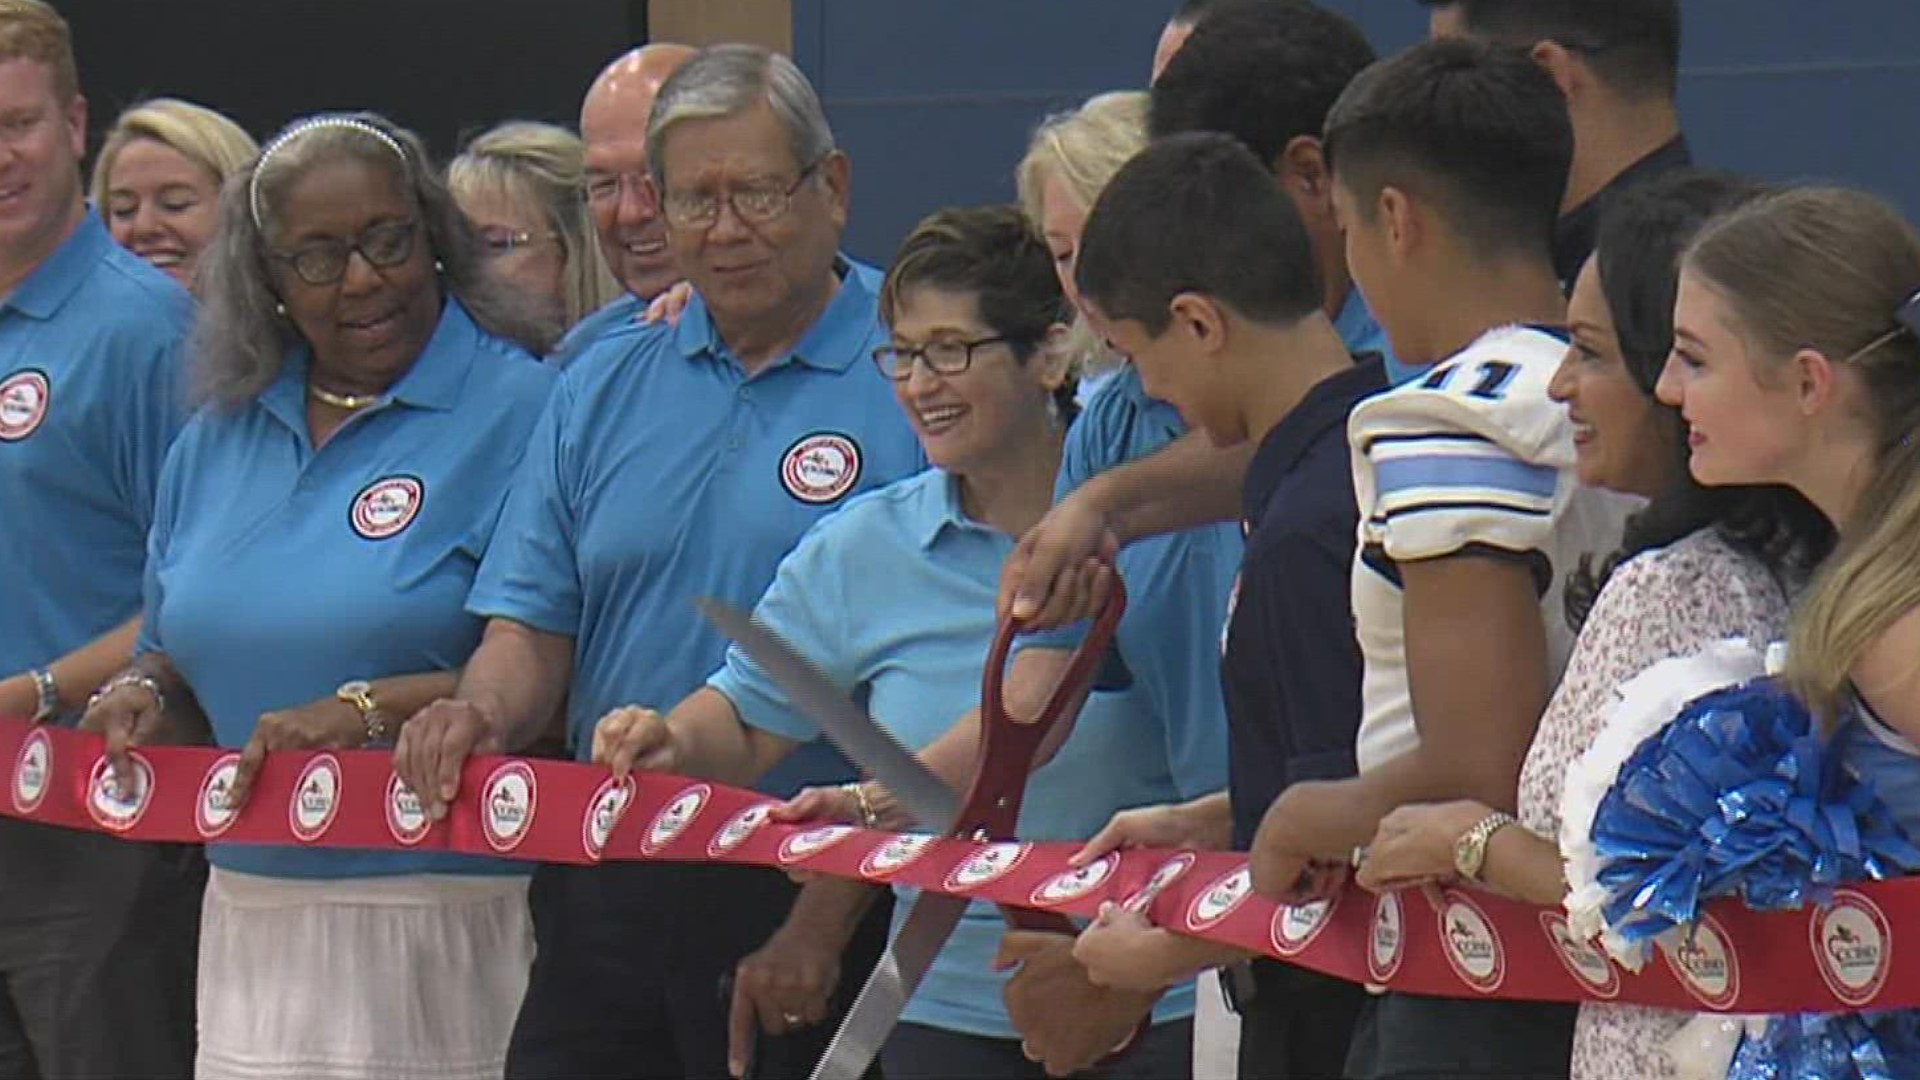 Mary Carroll High School opens with ribbon cutting ceremony